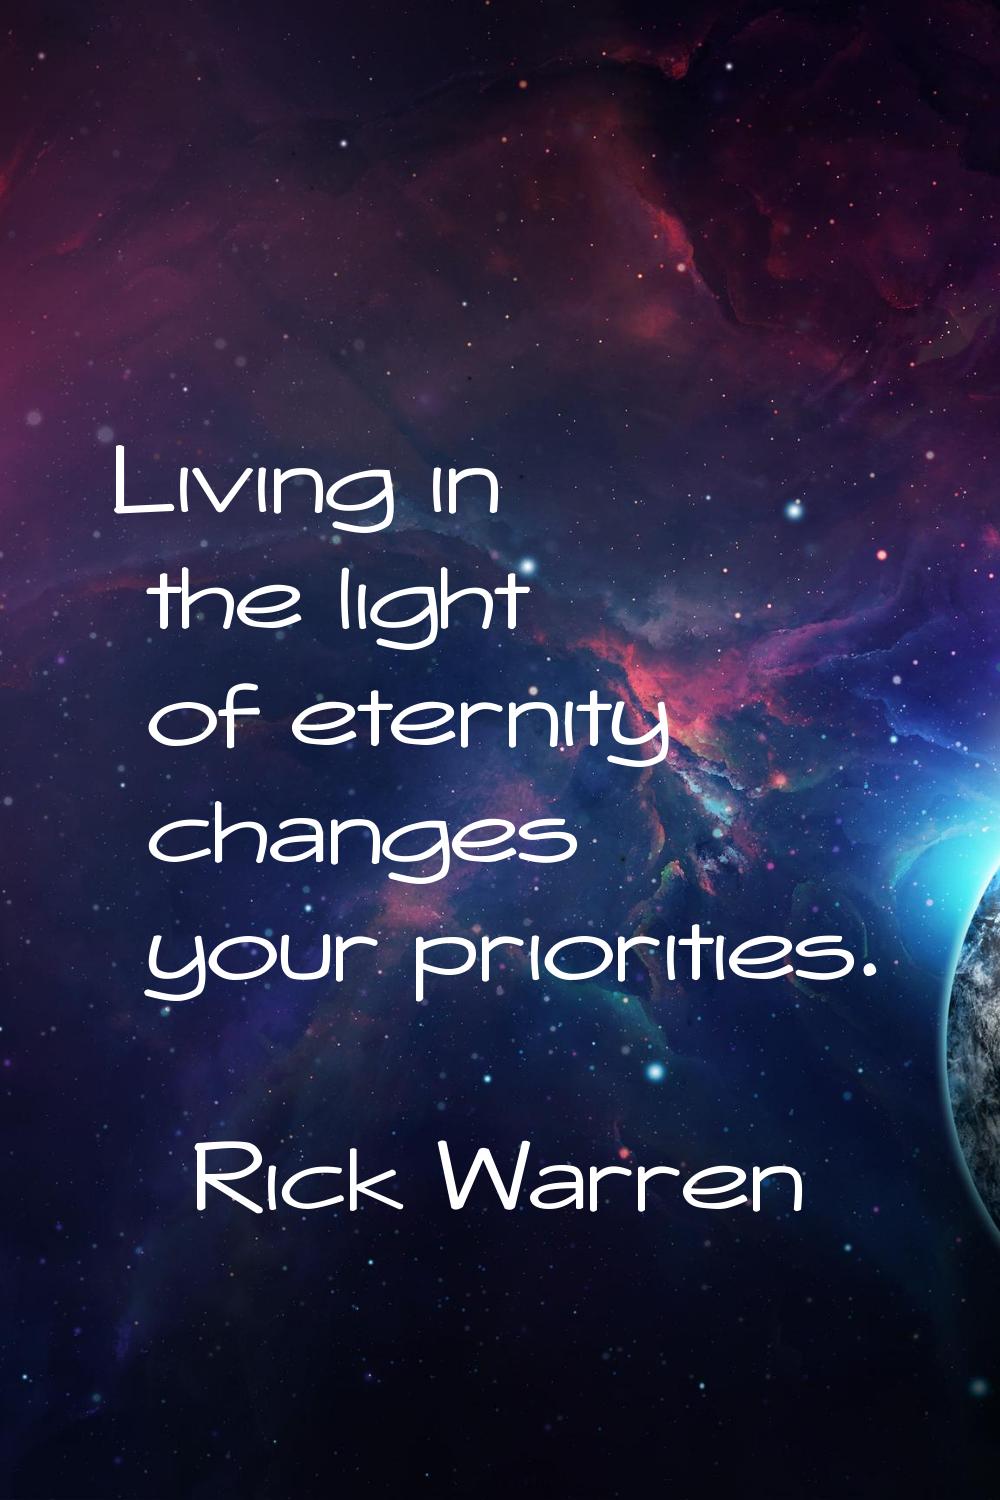 Living in the light of eternity changes your priorities.